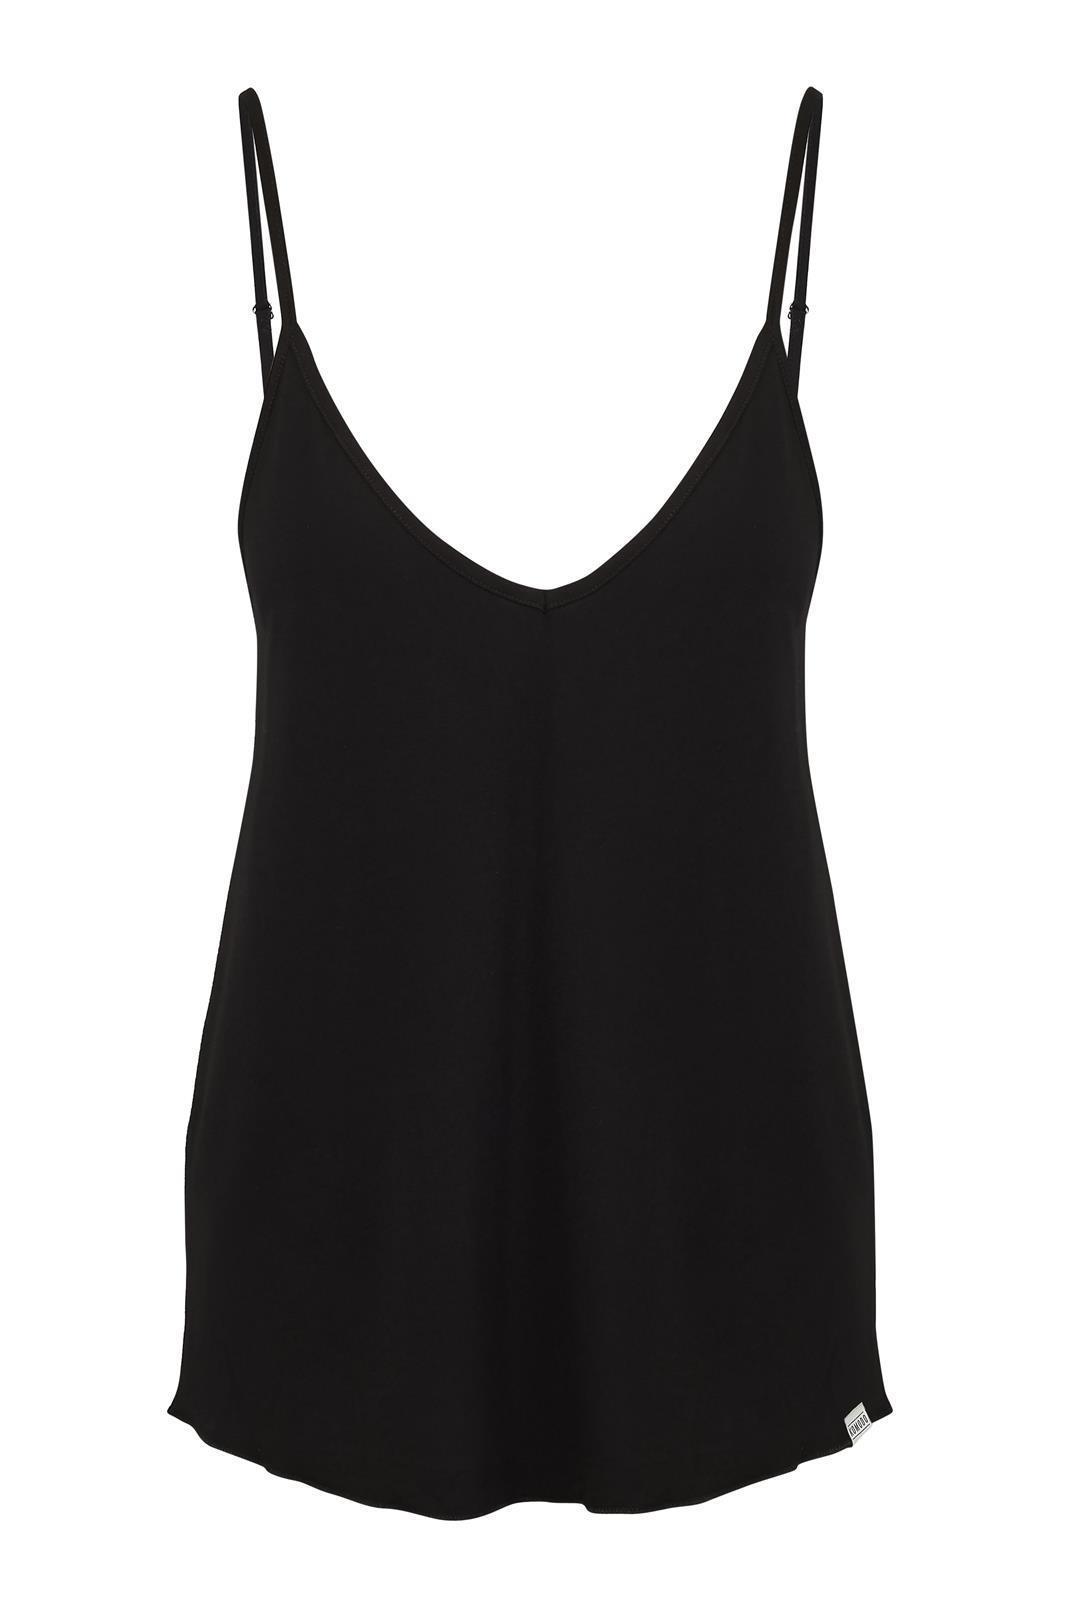 Camisole Top Modell: Mandy